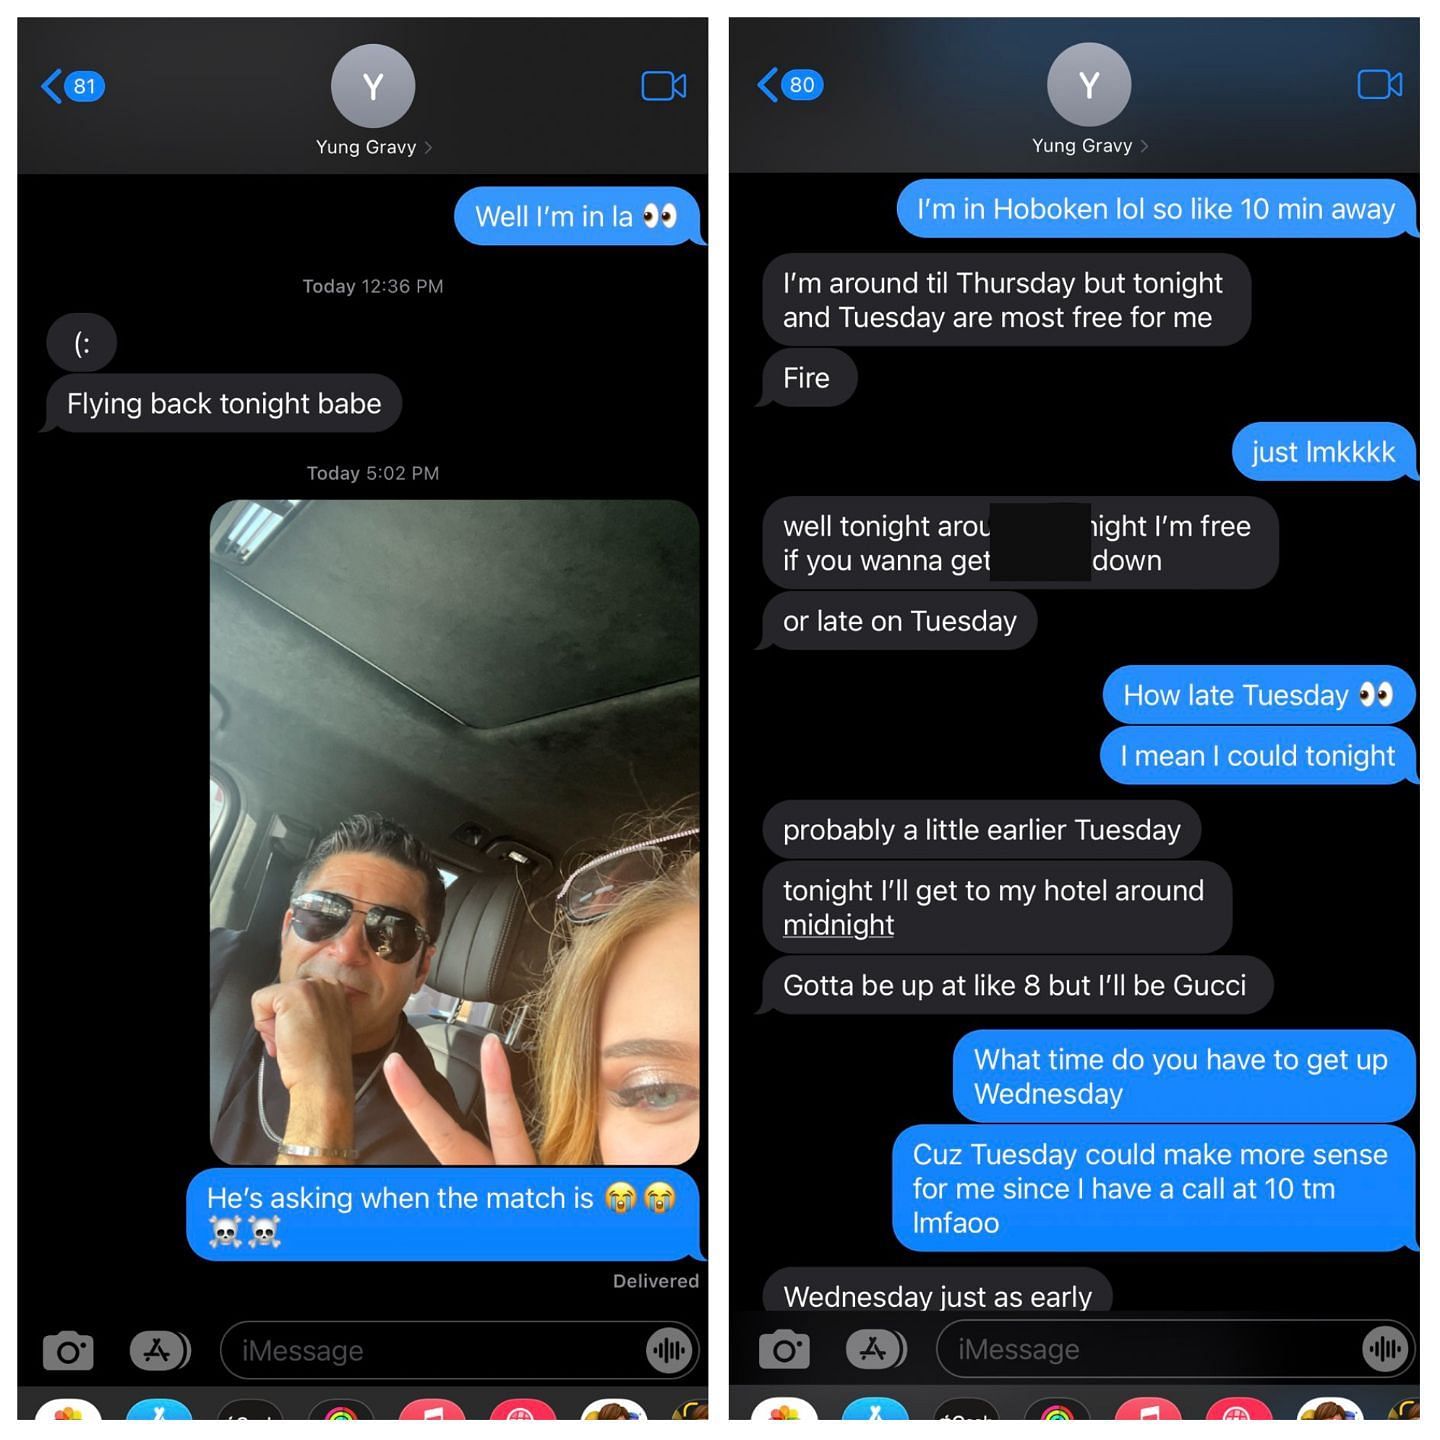 Louis shares a picture of the conversation between Yung Gravy and her, where he supposedly wanted to &quot;hook up&quot; with her. (Image via Ava Louis/ Twitter)